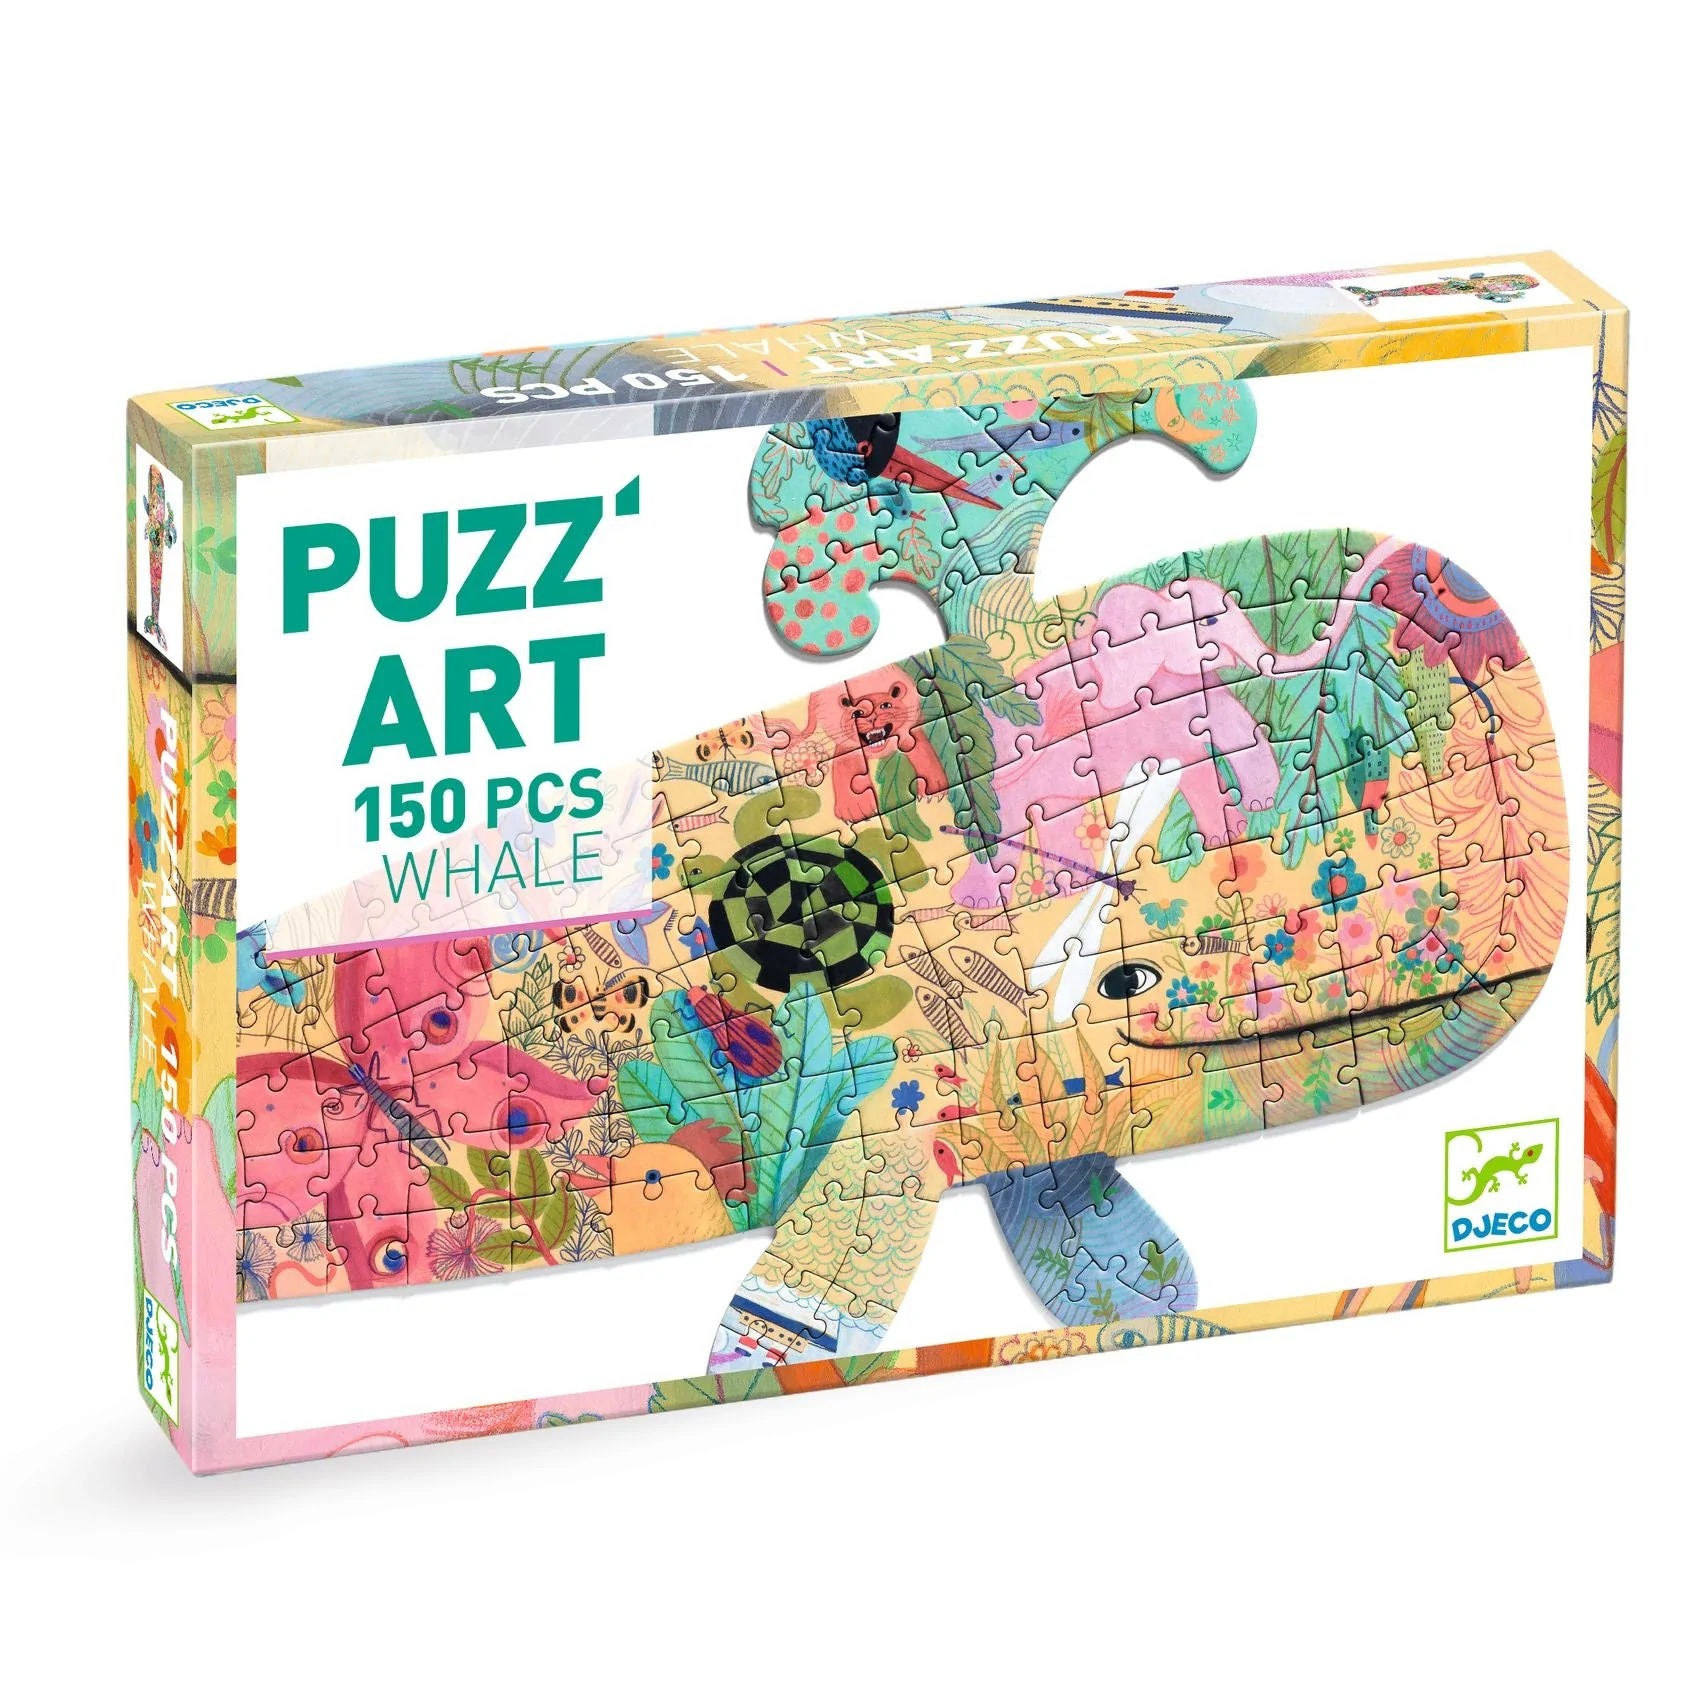 Djeco Whale 150pc Puzz'Art Shaped Jigsaw Puzzle + Poster